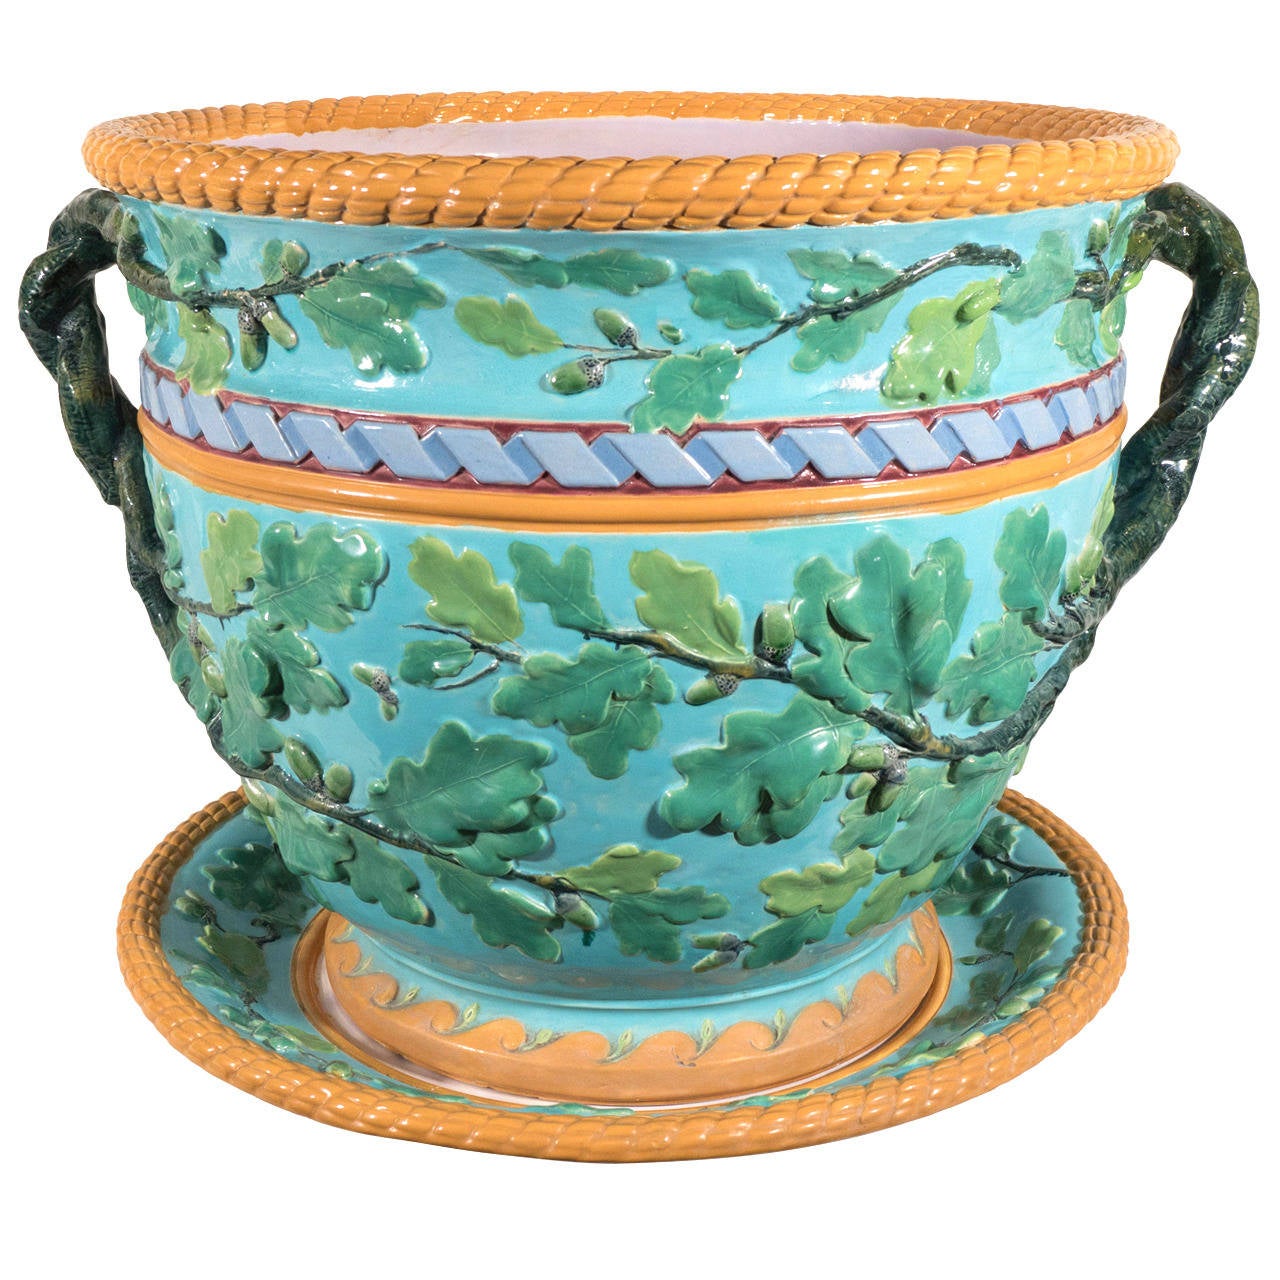 Large Minton Antique Majolica Planter with Green Leaves on a Turquoise Ground